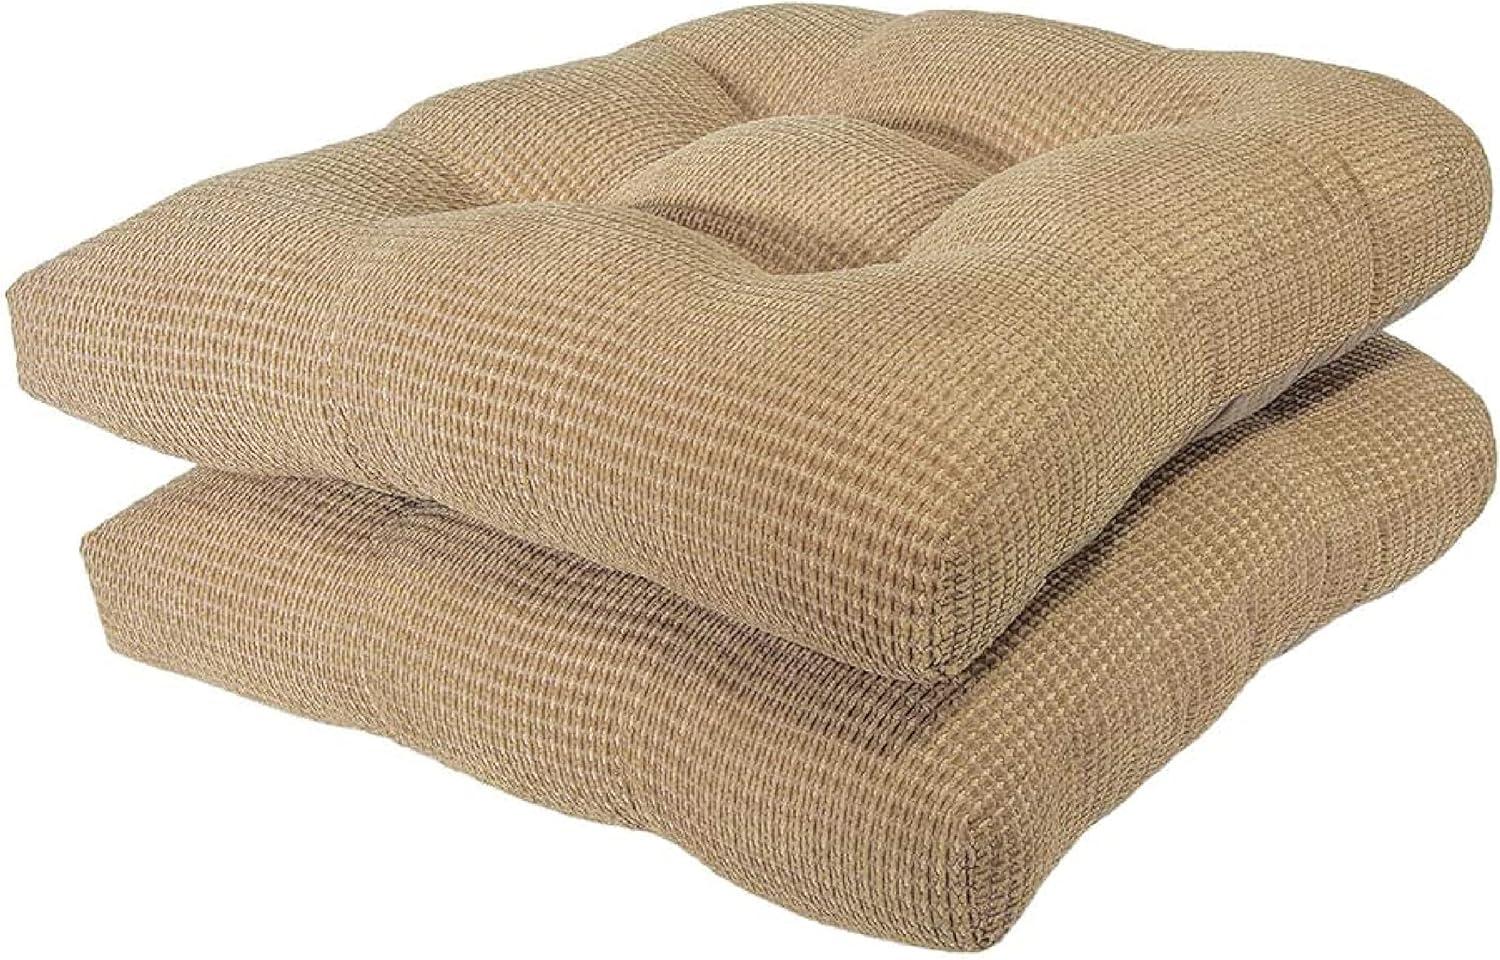 Plush Bamboo Memory Foam Square Chair Pad 2-Pack in Neutral